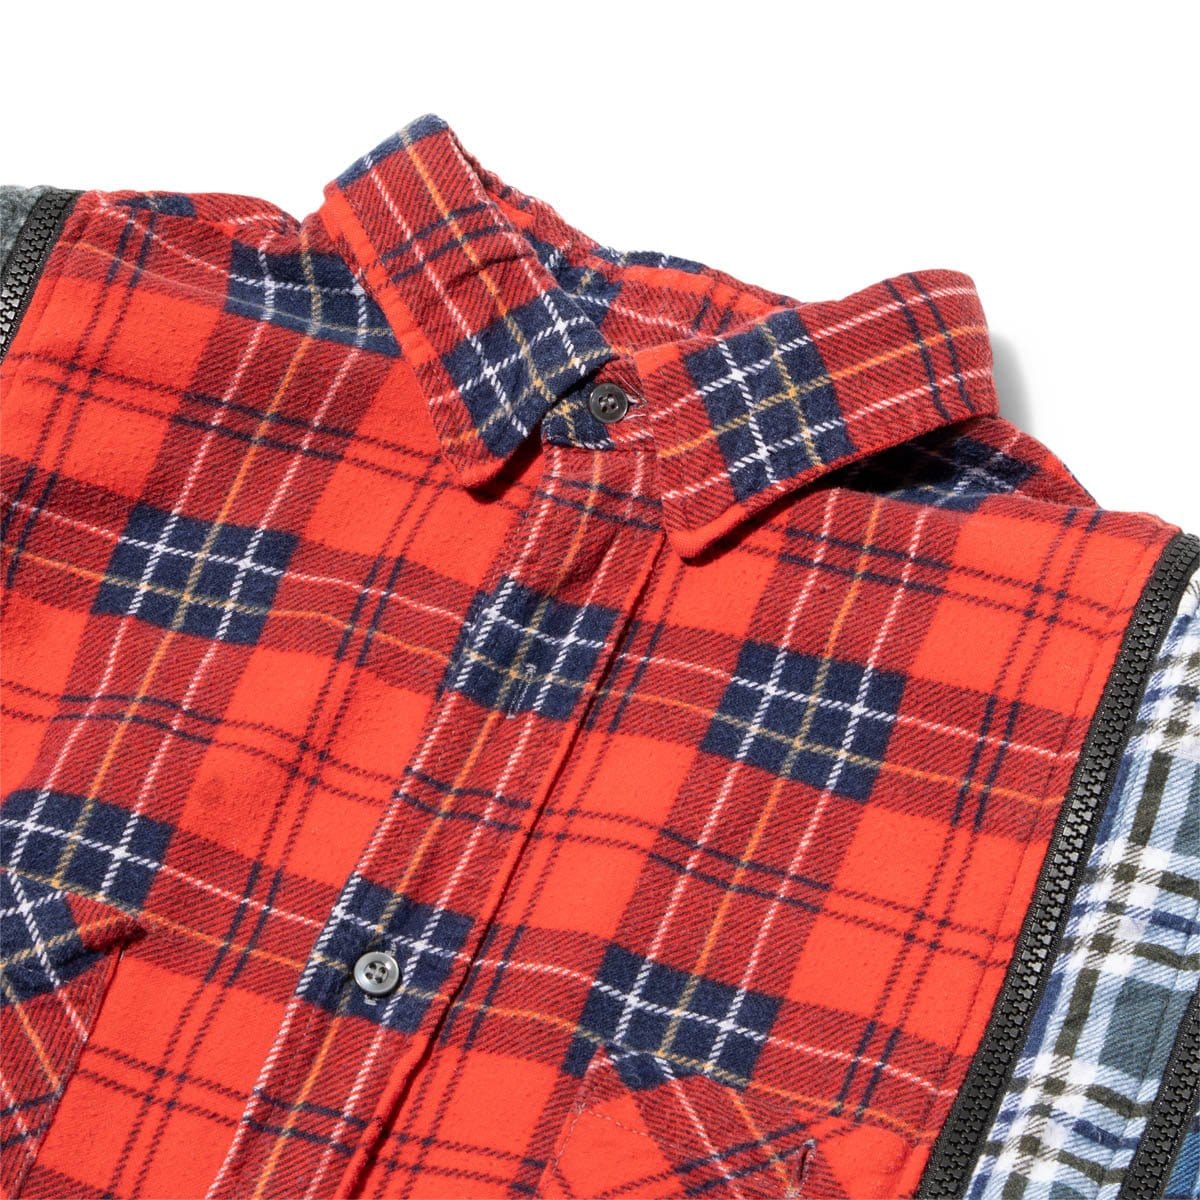 Needles Shirts ASSORTED / O/S 7 CUTS ZIPPED WIDE FLANNEL SHIRT SS21 9